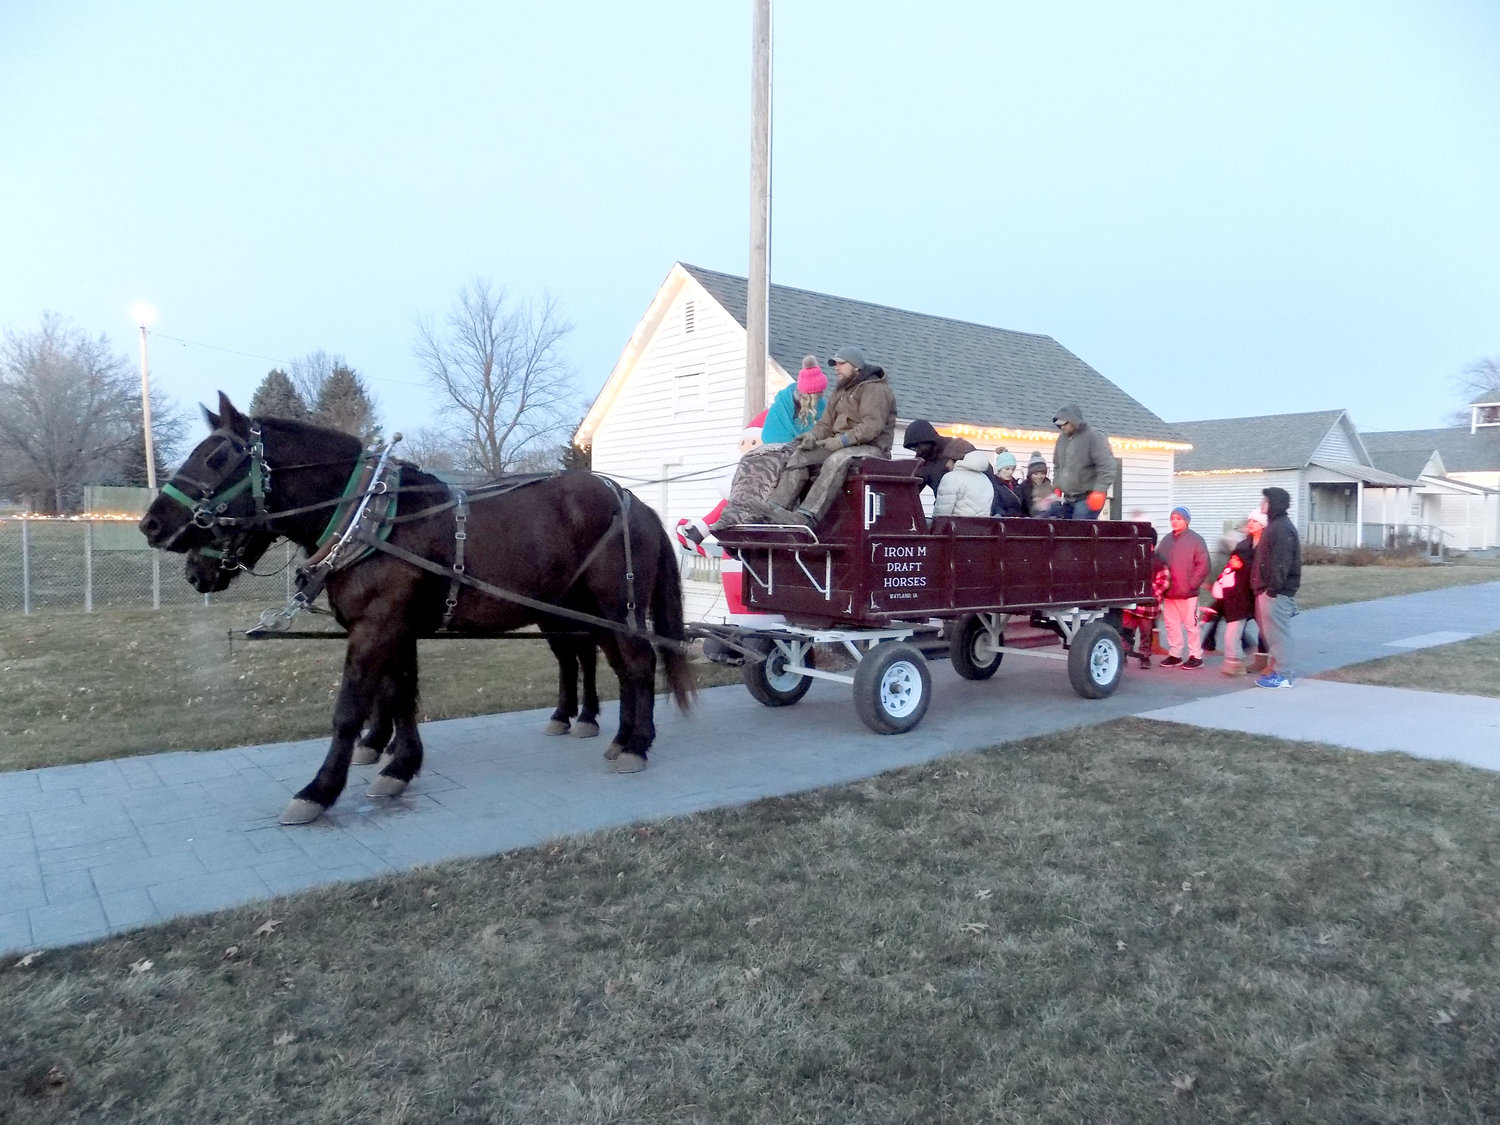 Horse-drawn carriage rides around town were a popular activity for families.